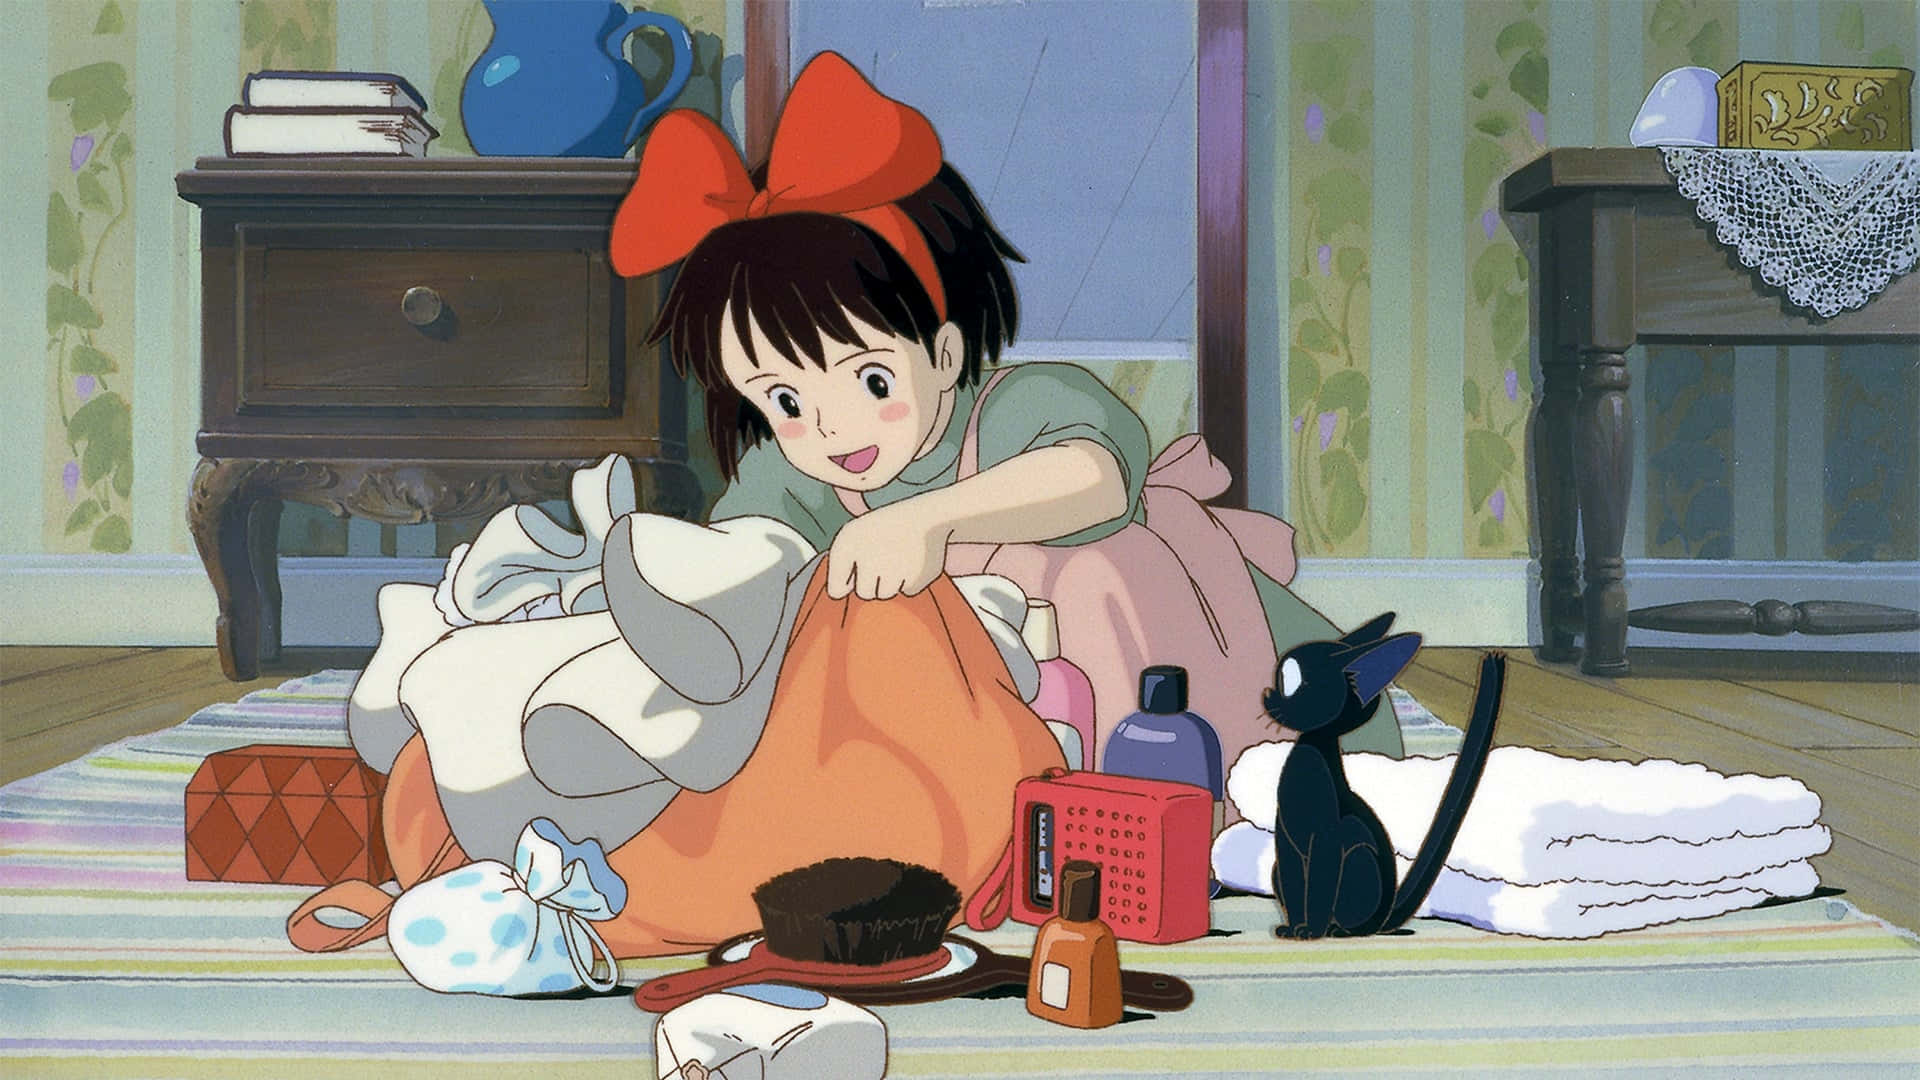 Kiki and Jiji taking off for a new adventure in "Kiki's Delivery Service" Wallpaper